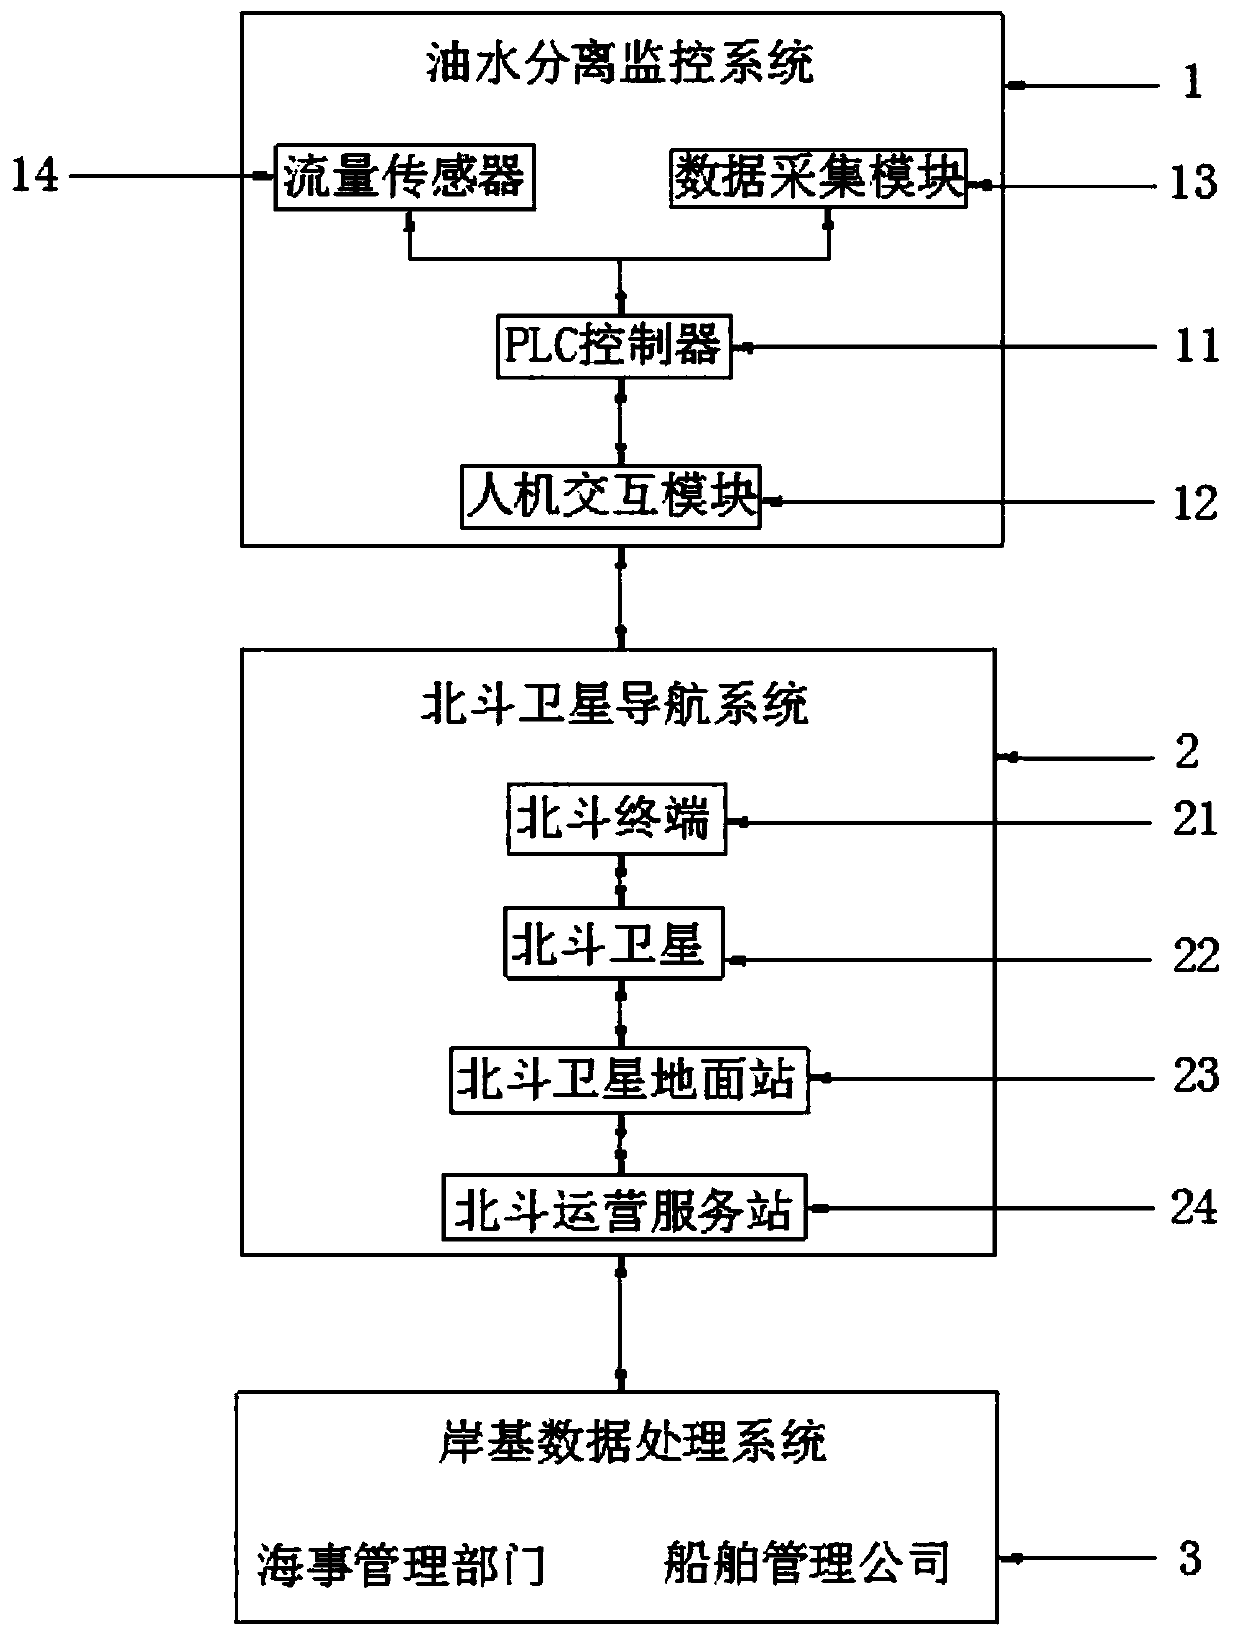 A ship oily sewage discharge ship shore monitoring system and method based on a Beidou short message